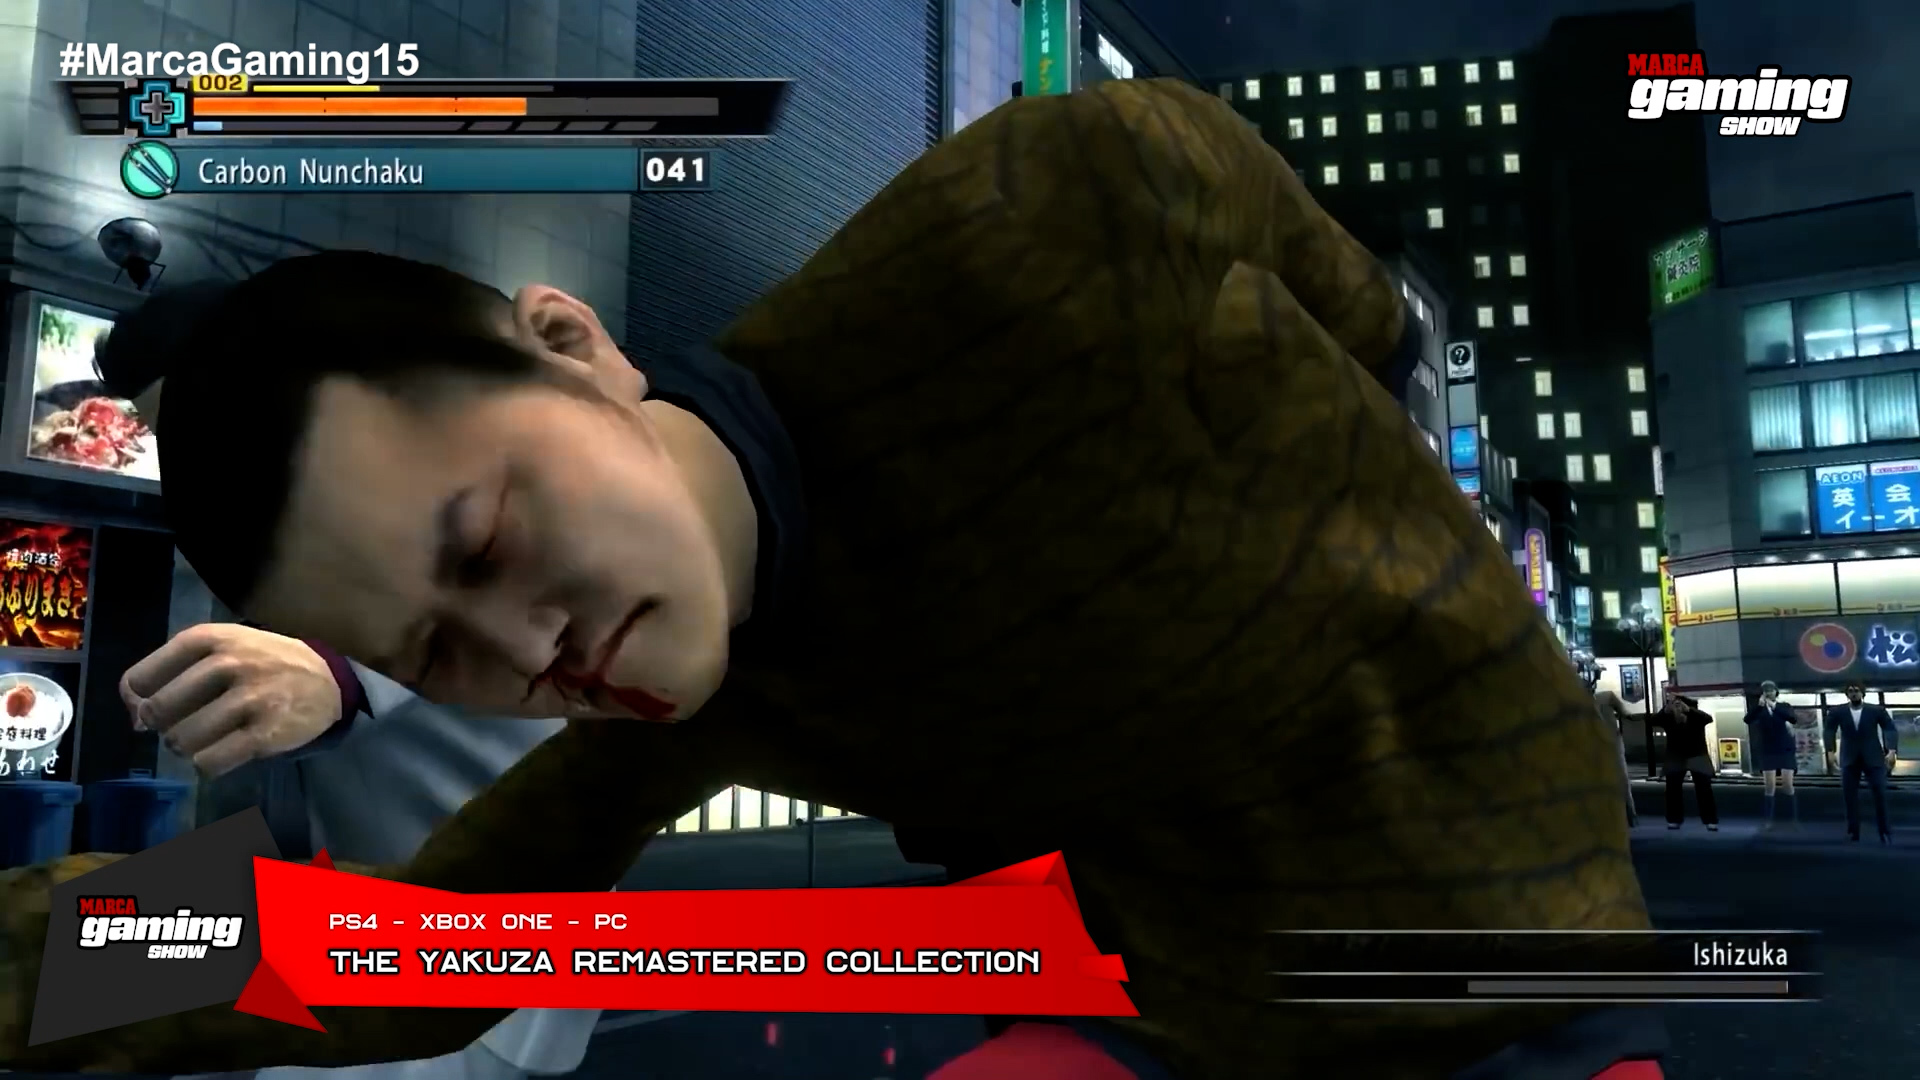 The Yakuza Remastered Collection (PC - PS4 - XBOX ONE)